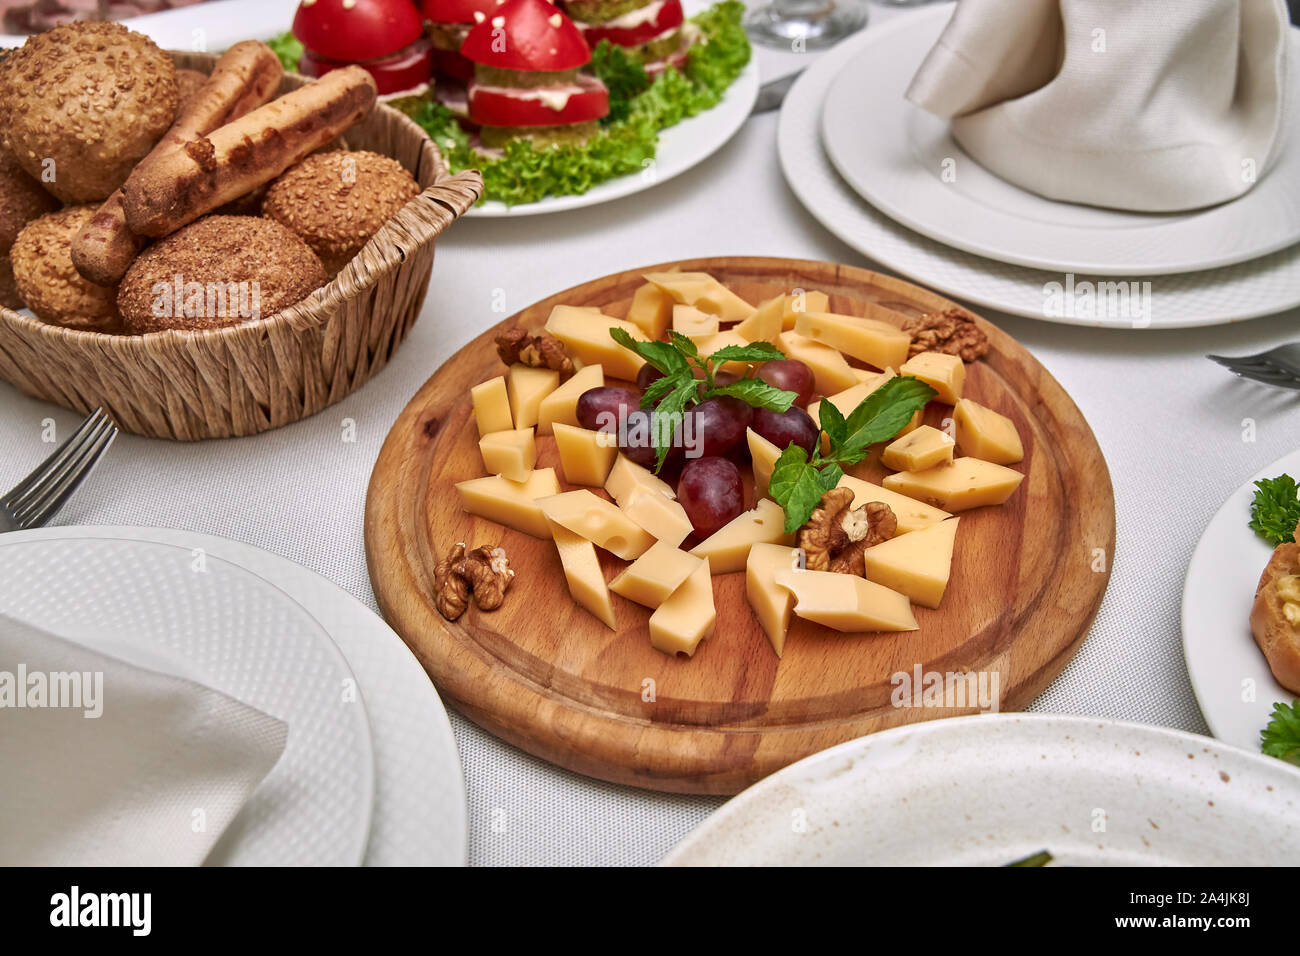 Small pieces of cheese of different varieties lie on a wooden plate on a served table in restaurant. Stock Photo